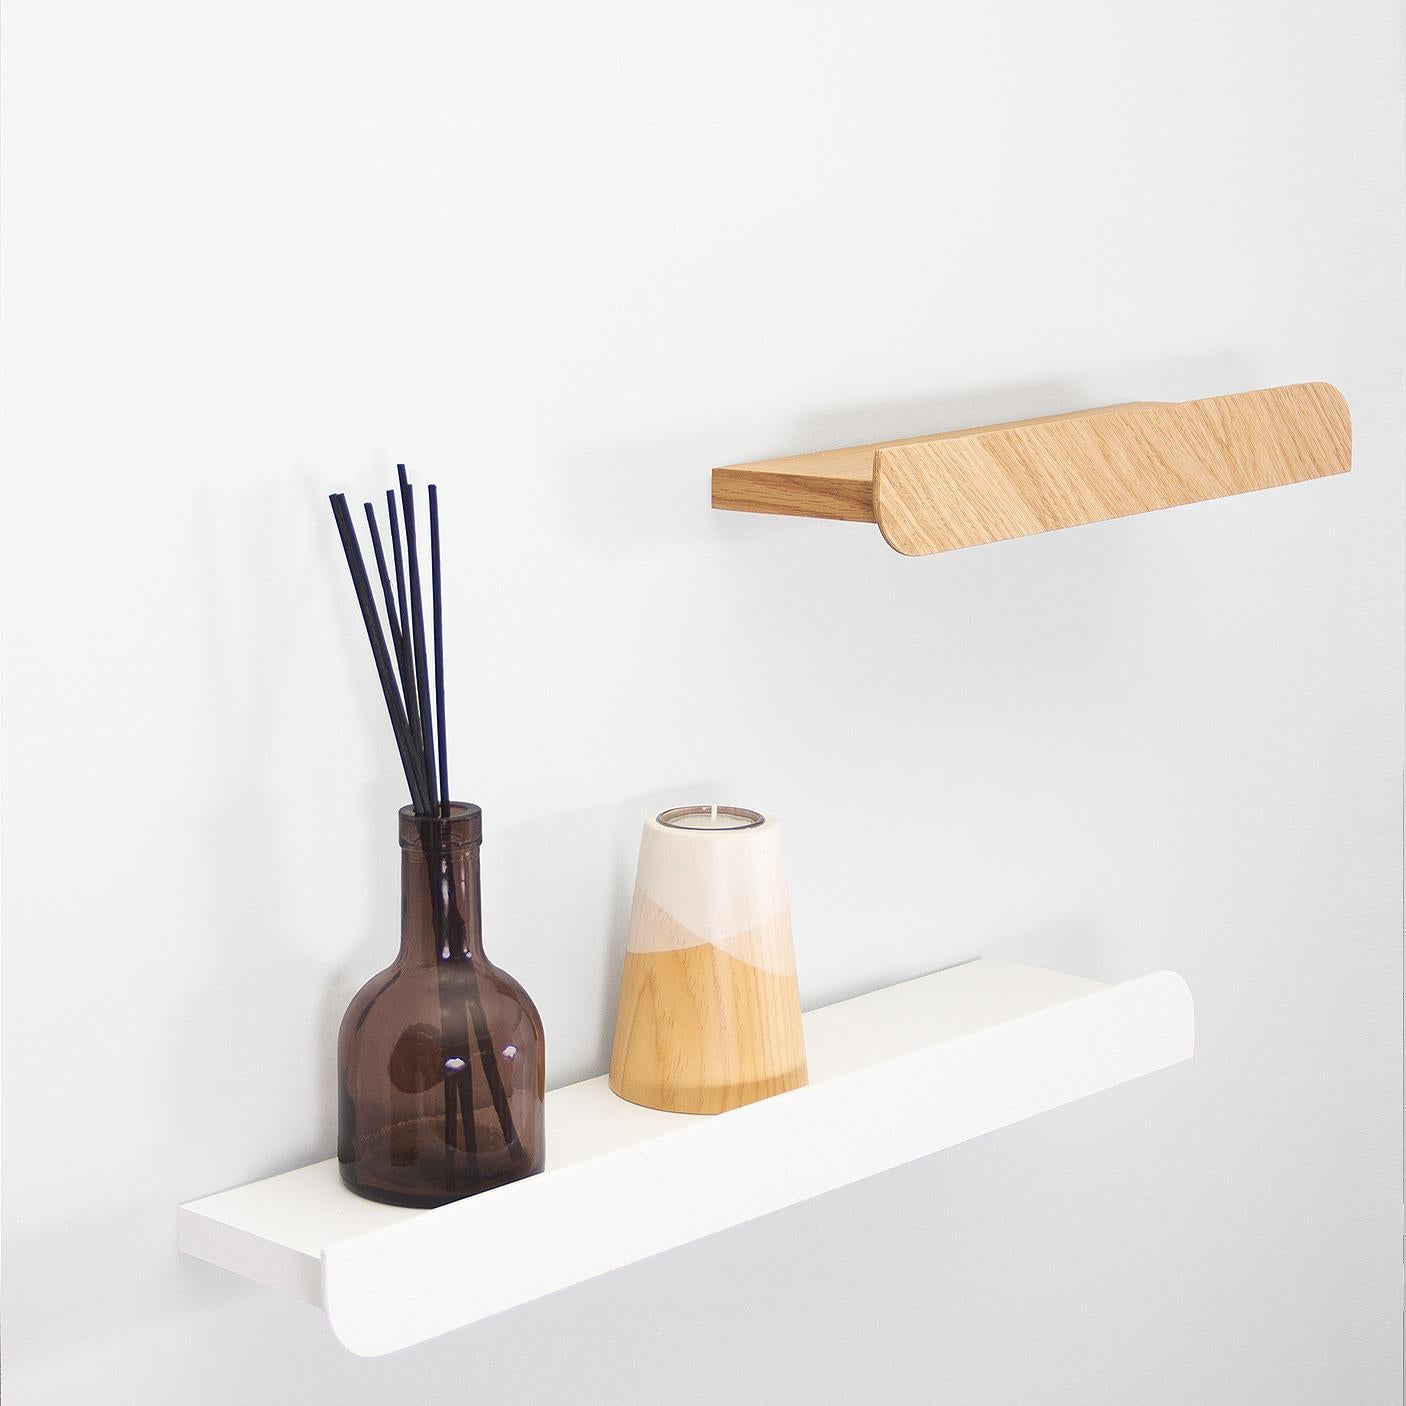 The gentle curves of the birds in flight have a captivating appeal, this piece has been skillfully achieved to capture the wingspan in wood. Designed to emerge from straight walls with gentle grace, the shape of the Pelican Shelf bookshelf emulates